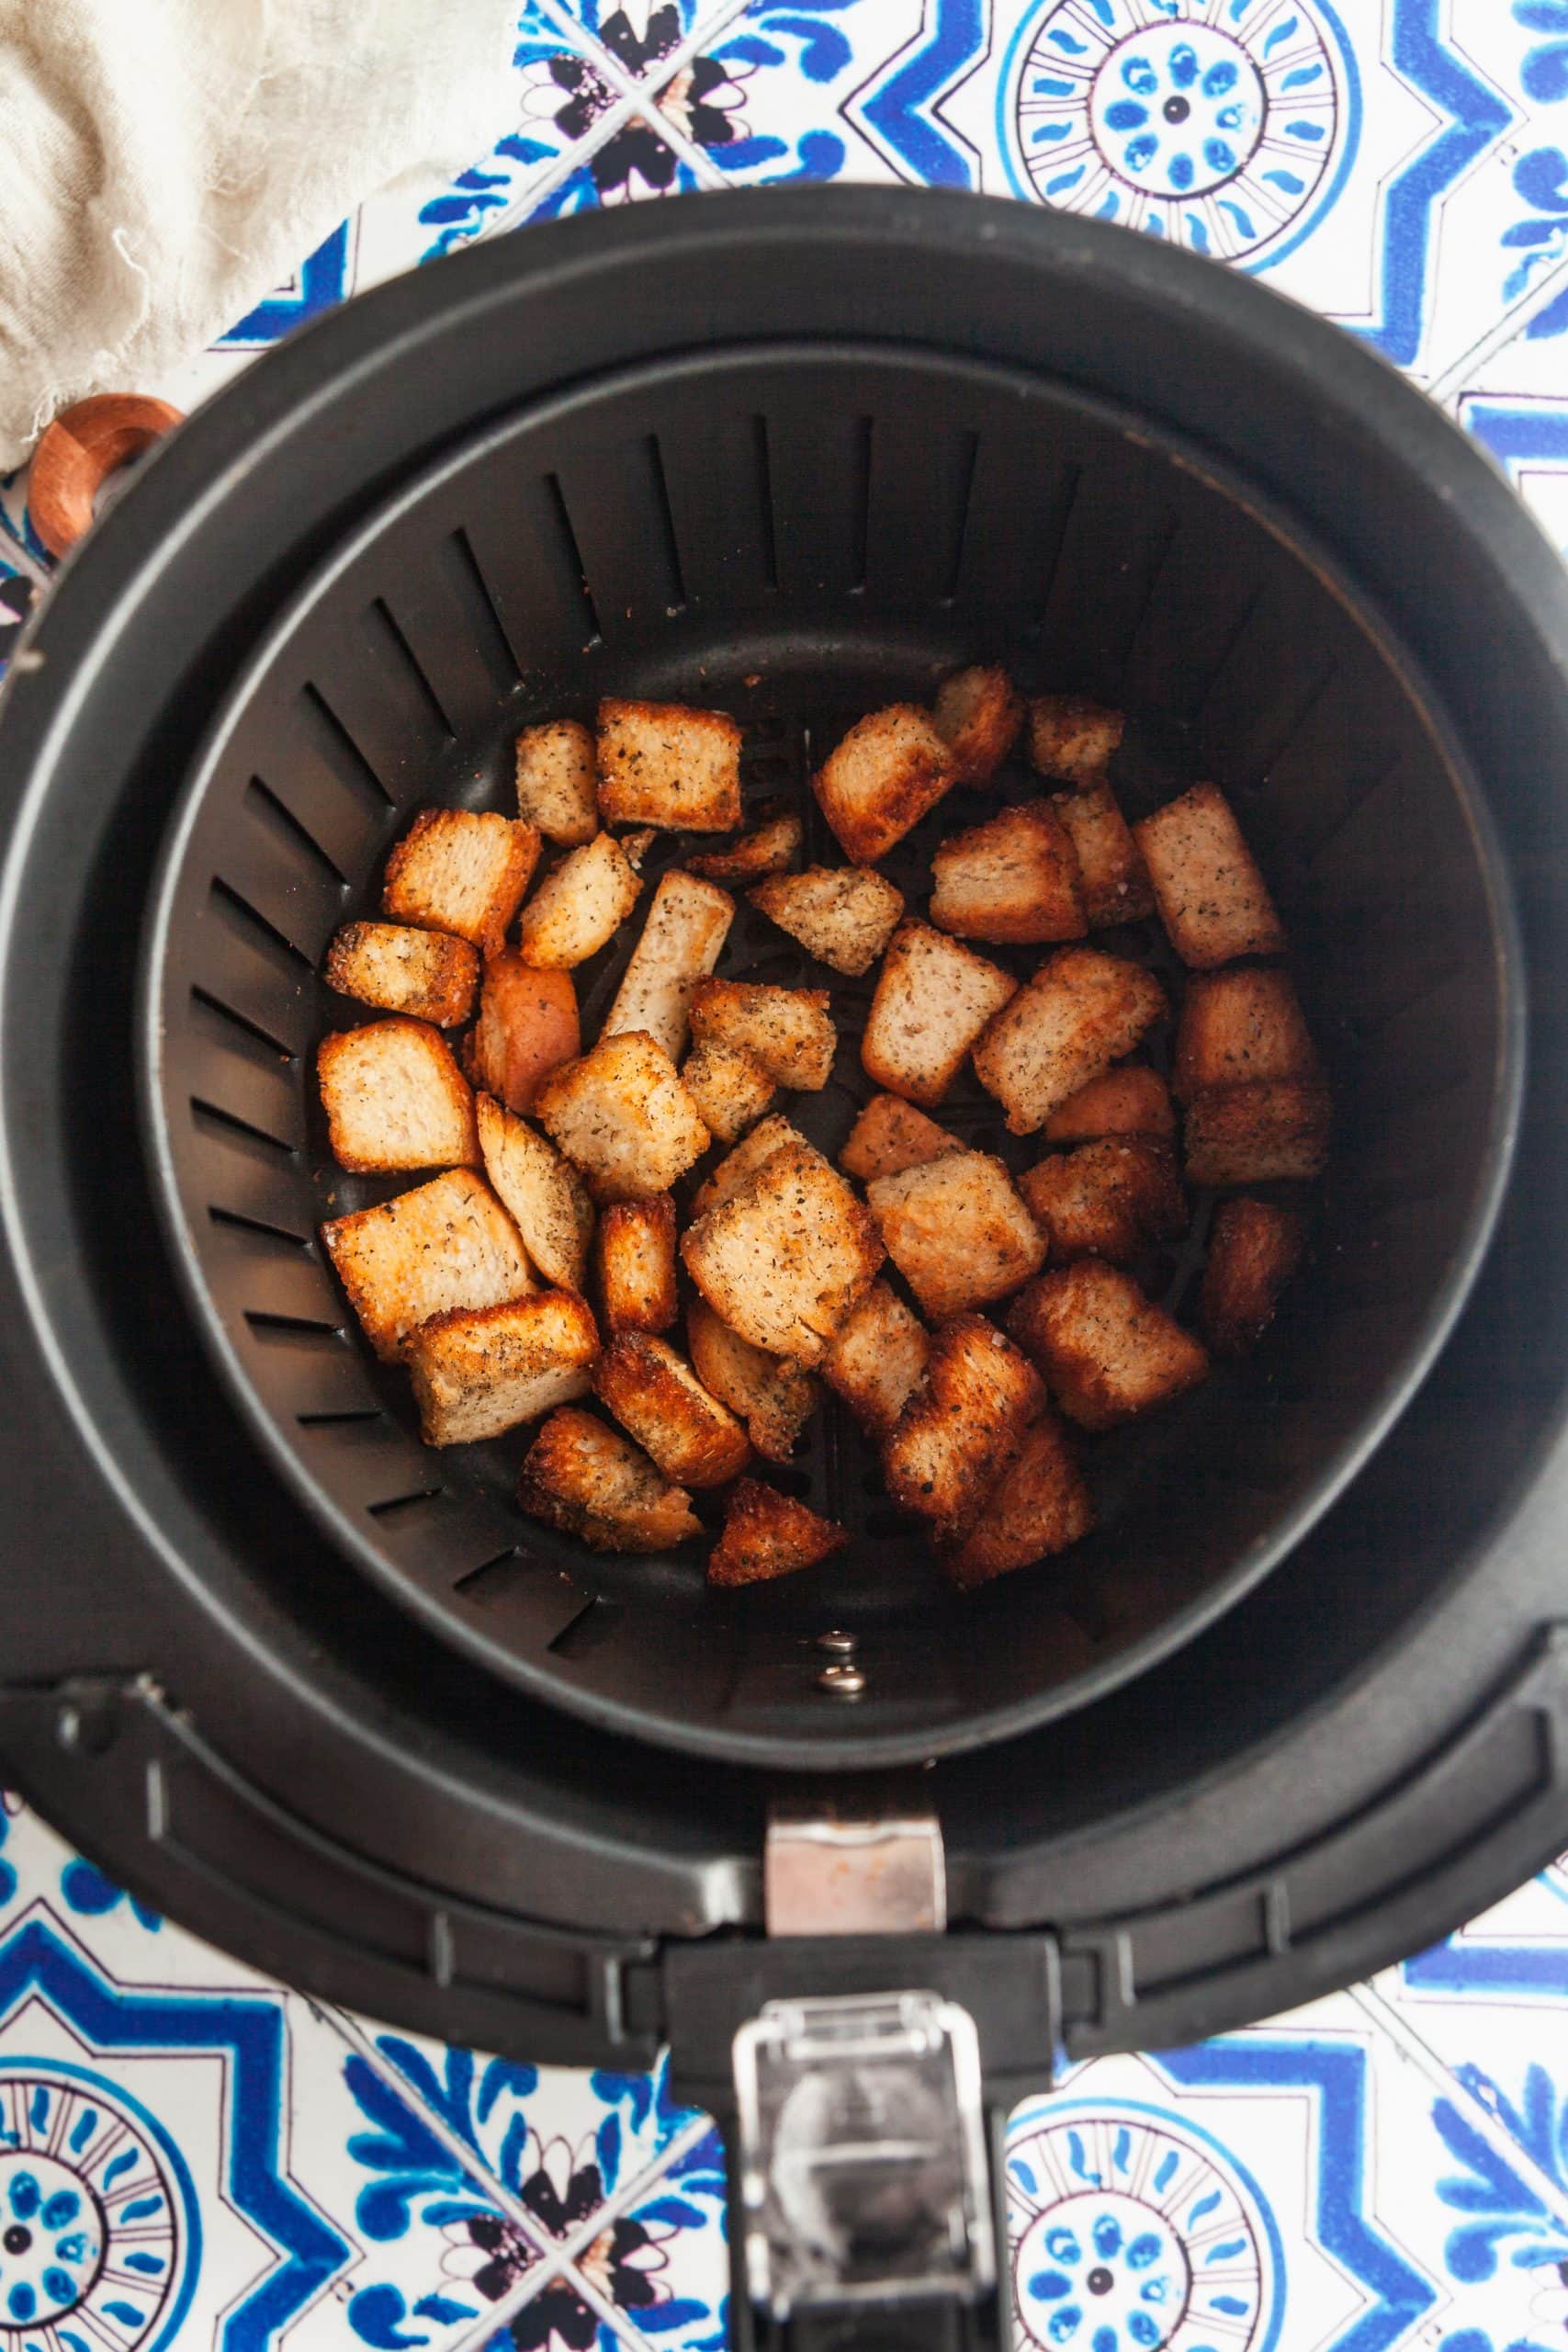 Croutons in the air fryer basket.